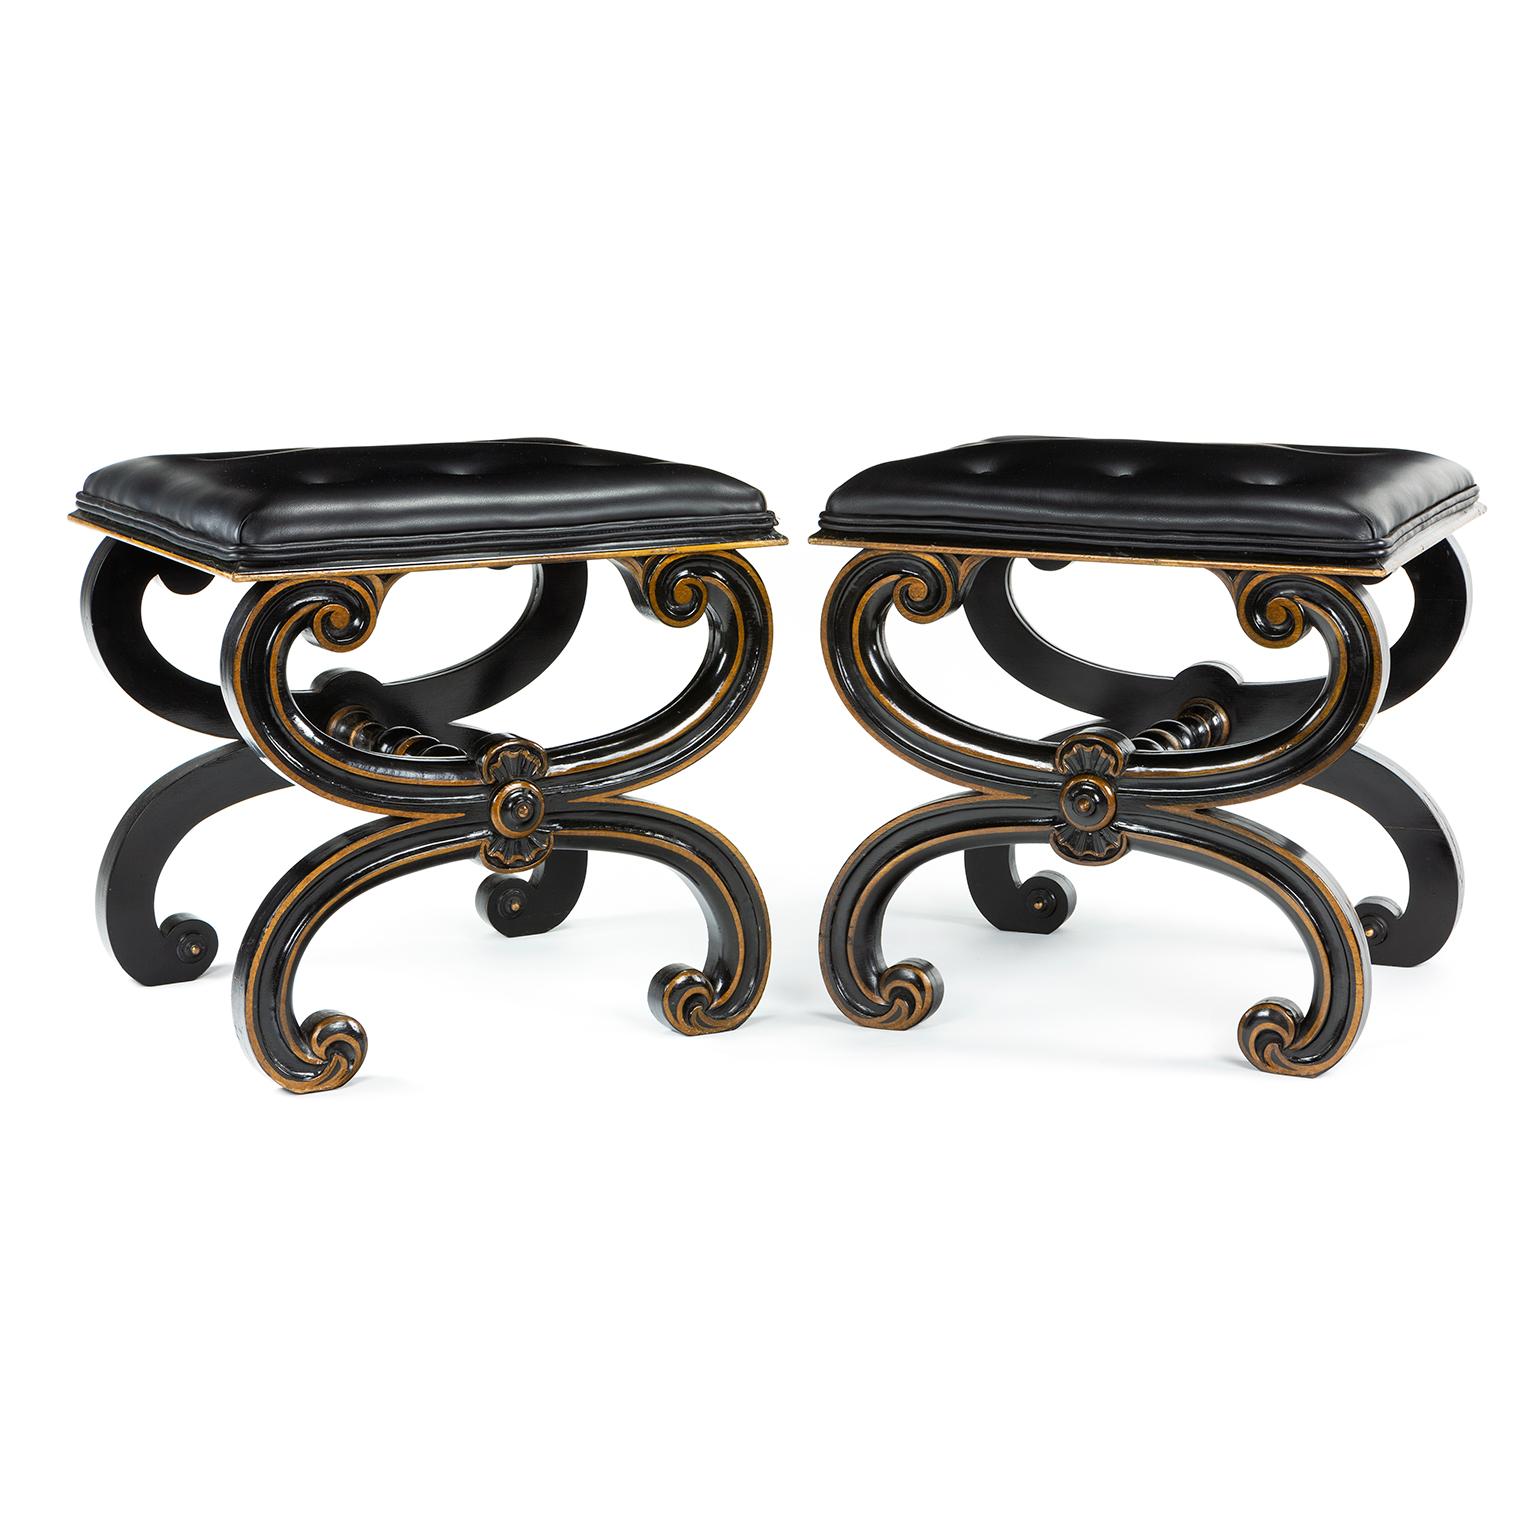 A pair of stools covered in in black leather with a black painted finish edged in gold, after a design by Thomas Hope.

Thomas Hope’s influence over the newly-coined ‘interior design’, continued long after his death in 1831. Thanks to the